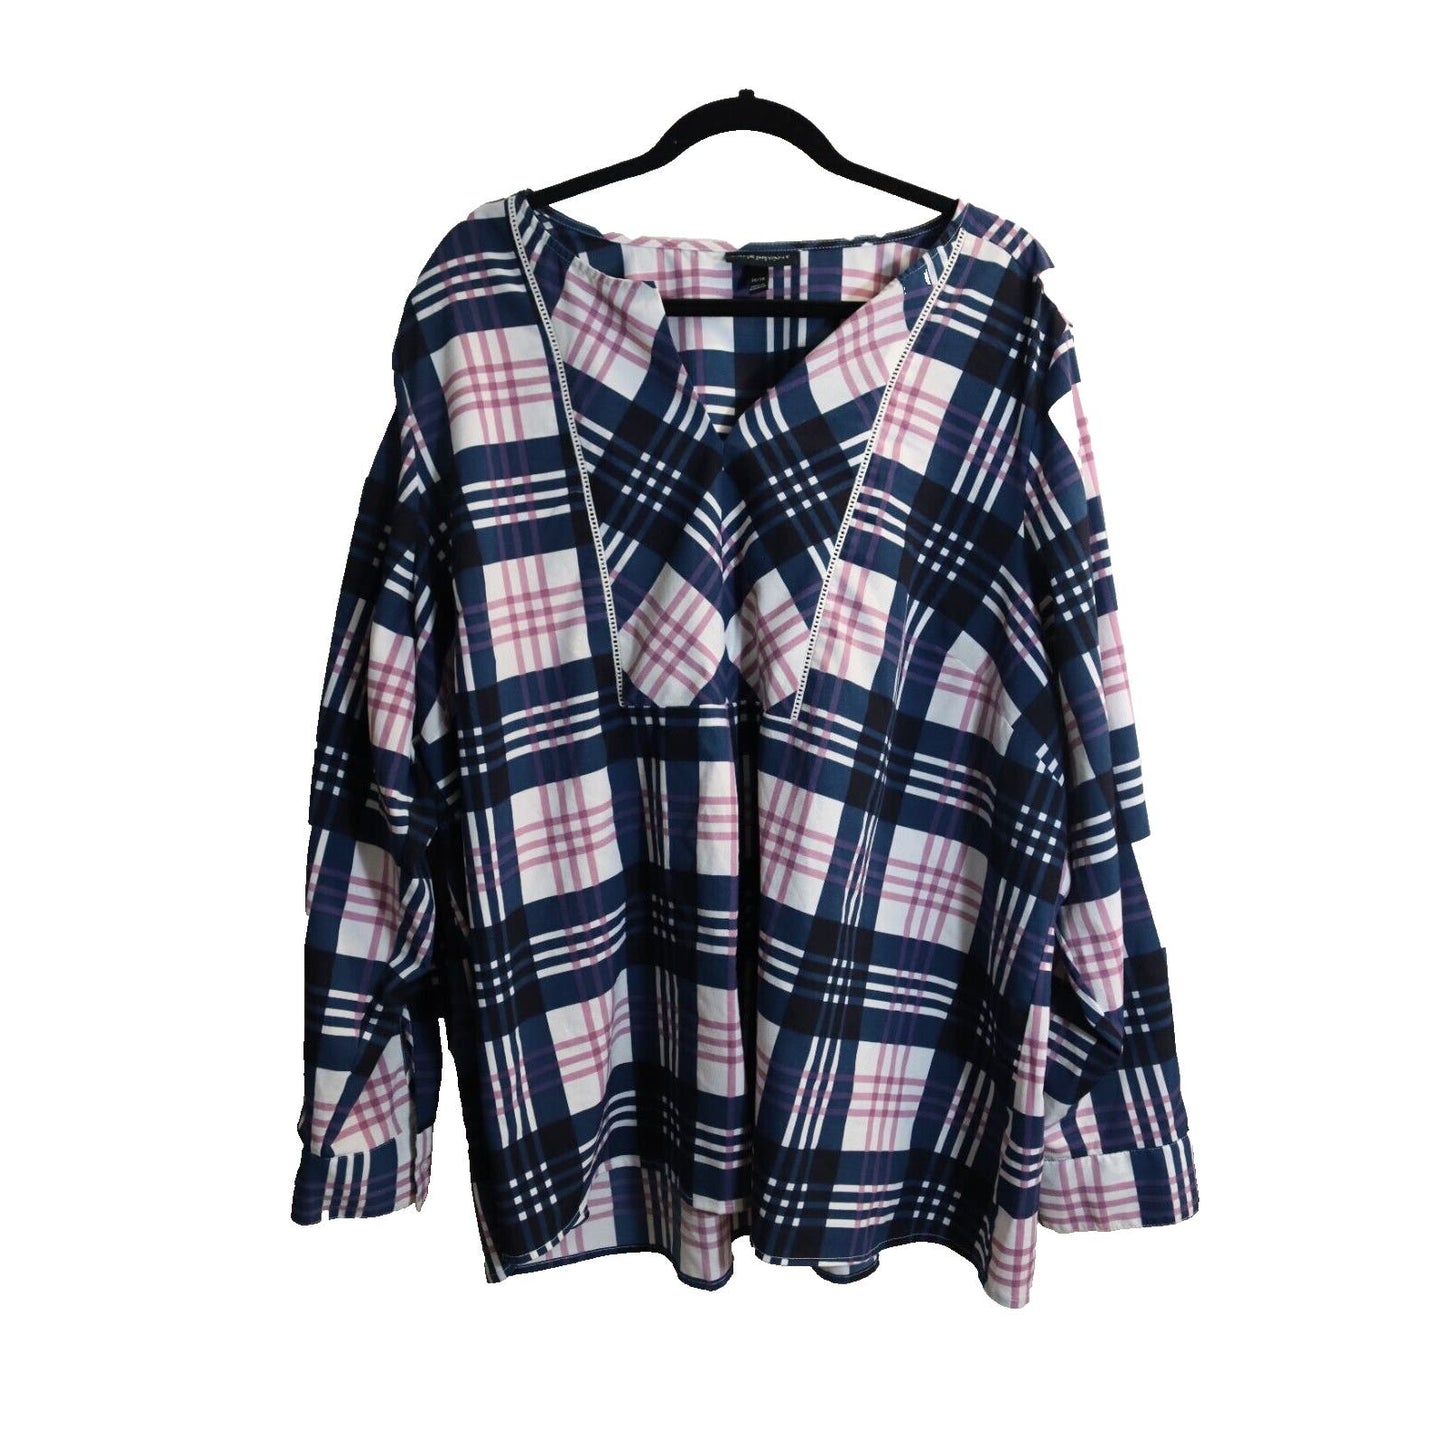 Lane Bryant Navy Pink White Plaid Long Sleeved Top Size 26/28